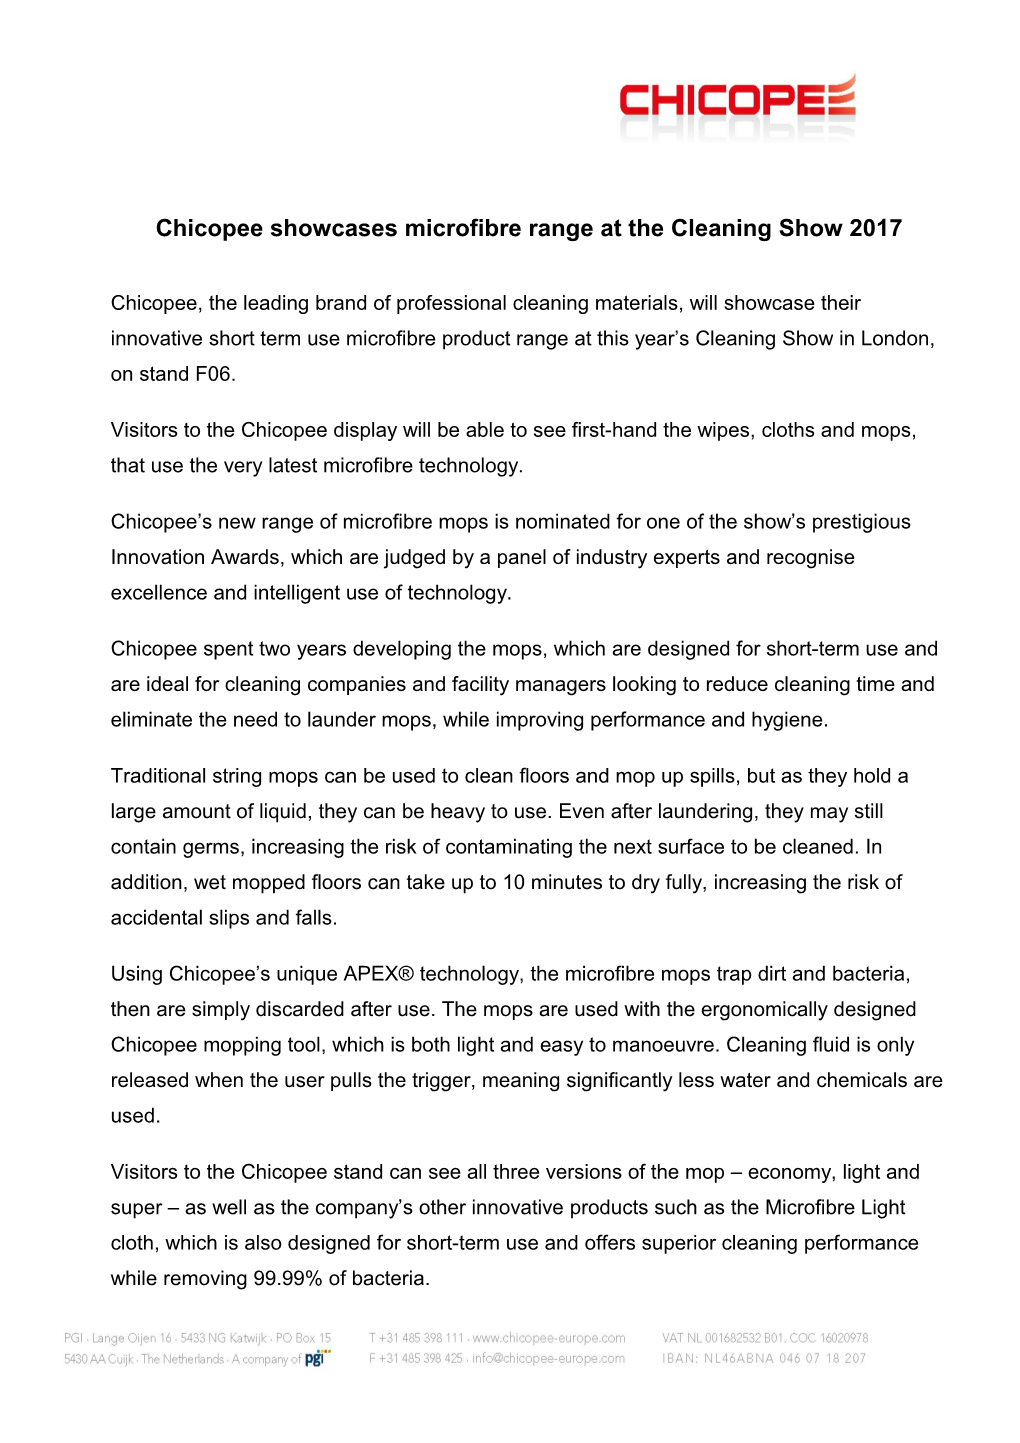 Chicopee Showcases Microfibre Range at the Cleaning Show 2017